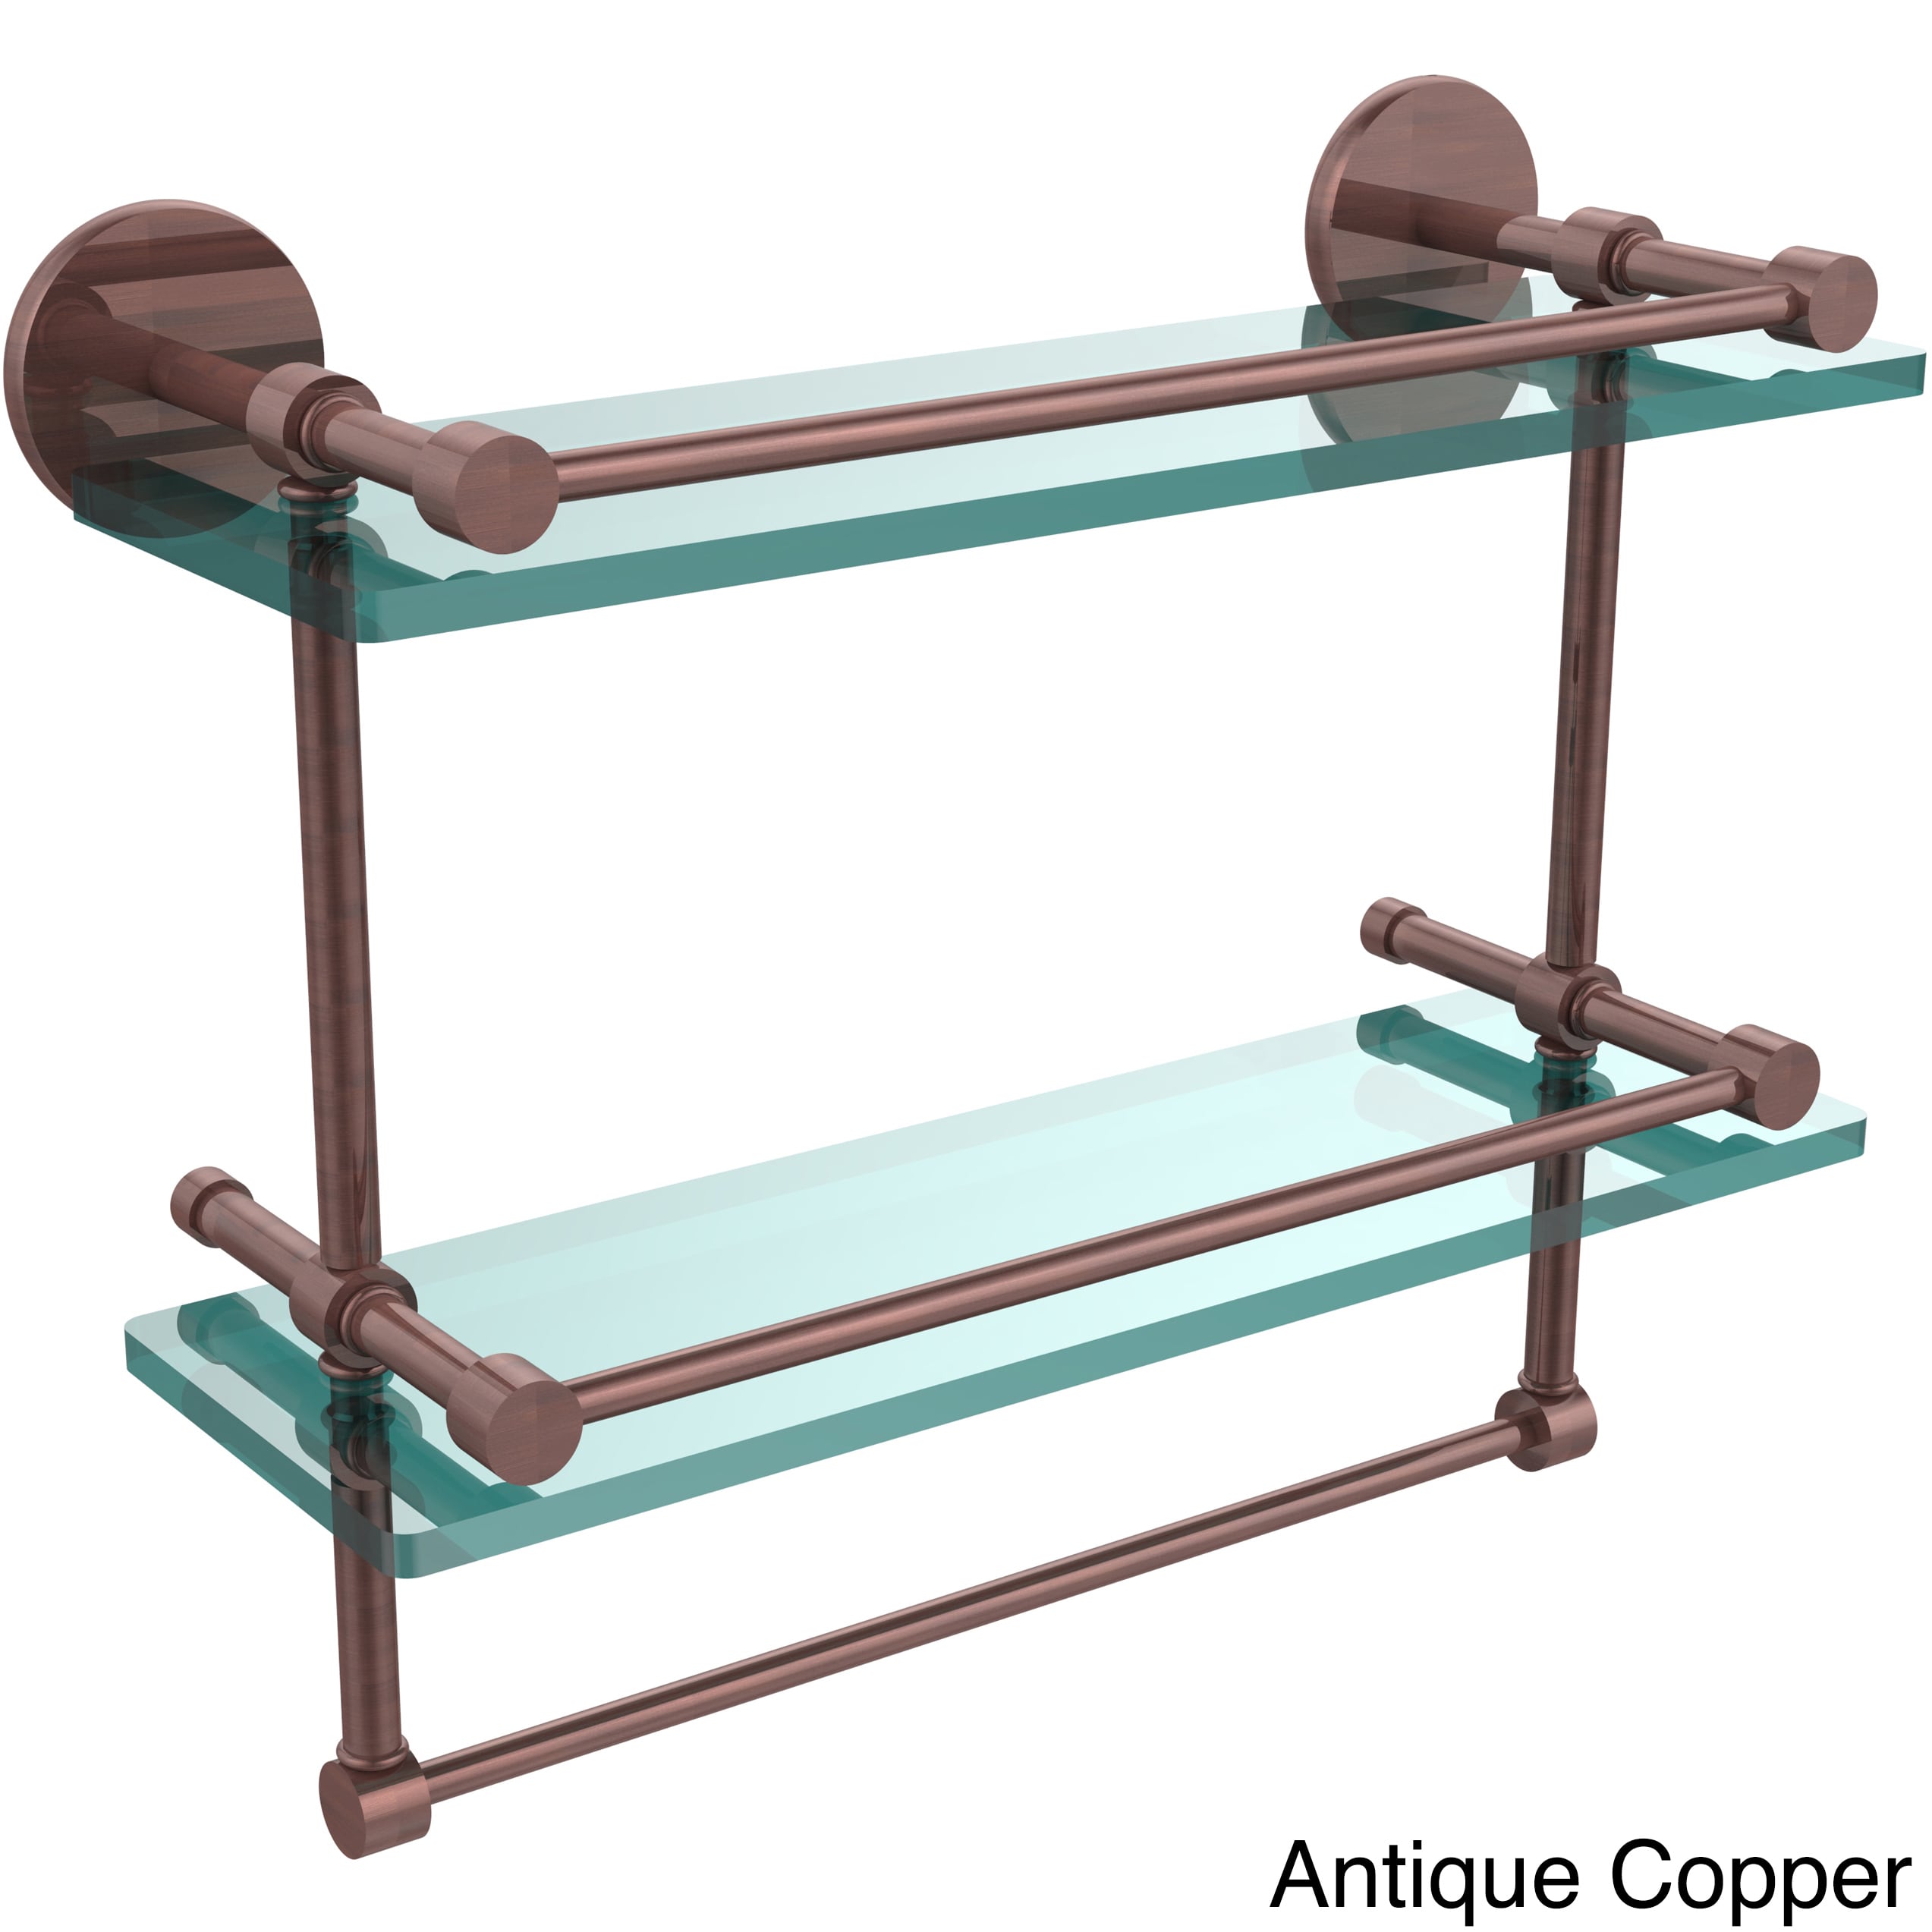 16 Inch Gallery Double Glass Shelf with Towel Bar - P1000-2TB/16-GAL-PC - image 3 of 5